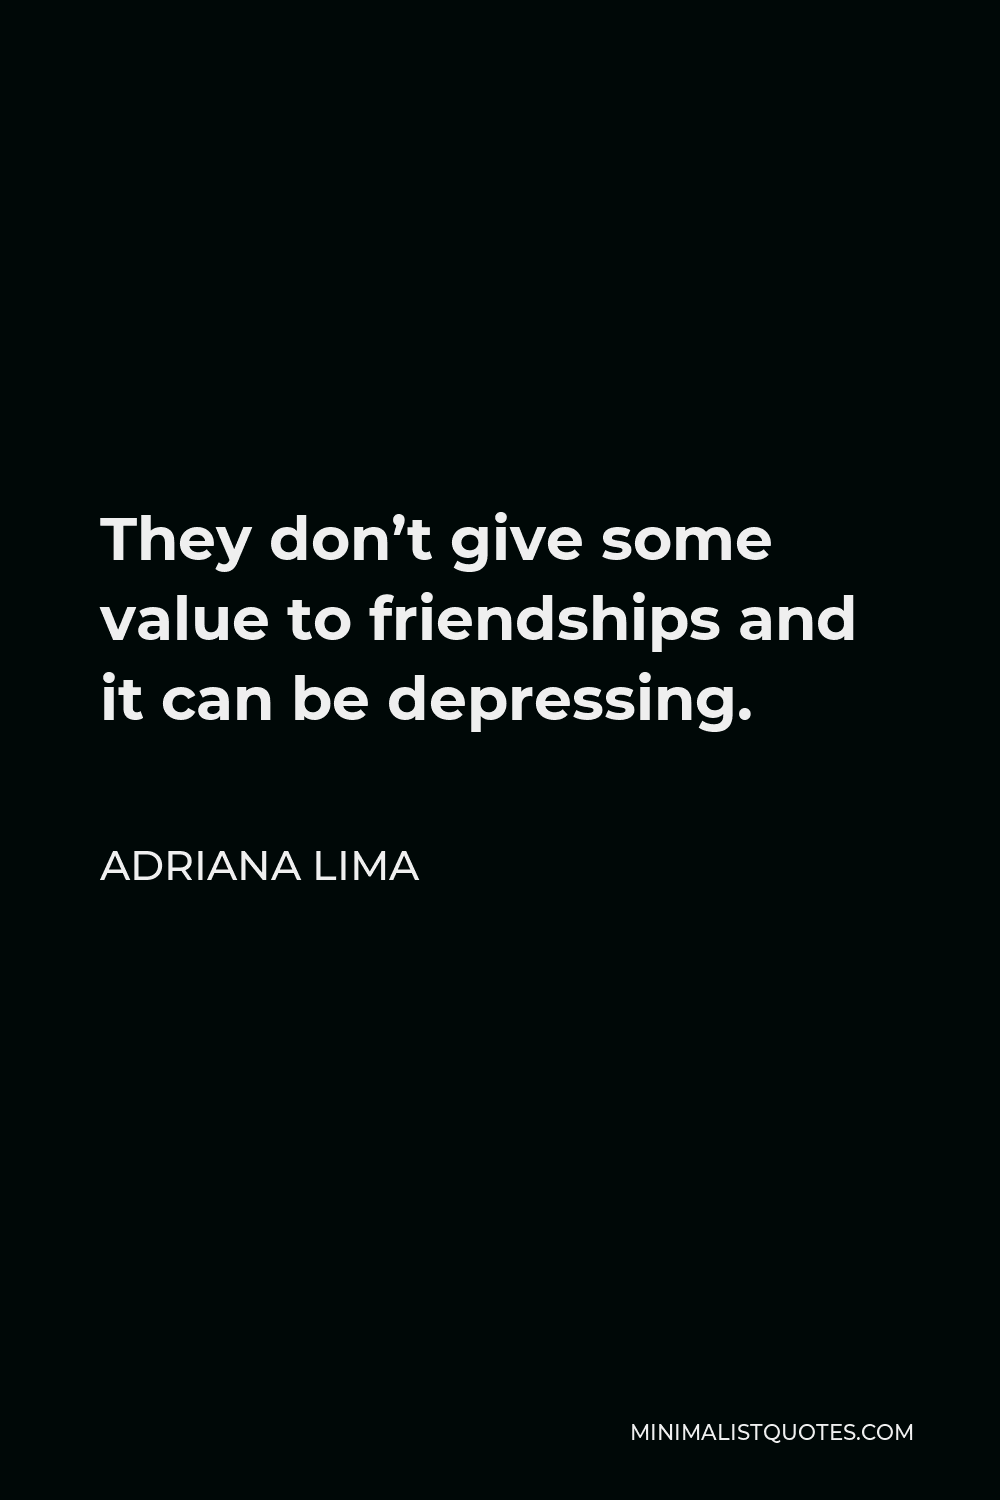 Adriana Lima Quote - They don’t give some value to friendships and it can be depressing.